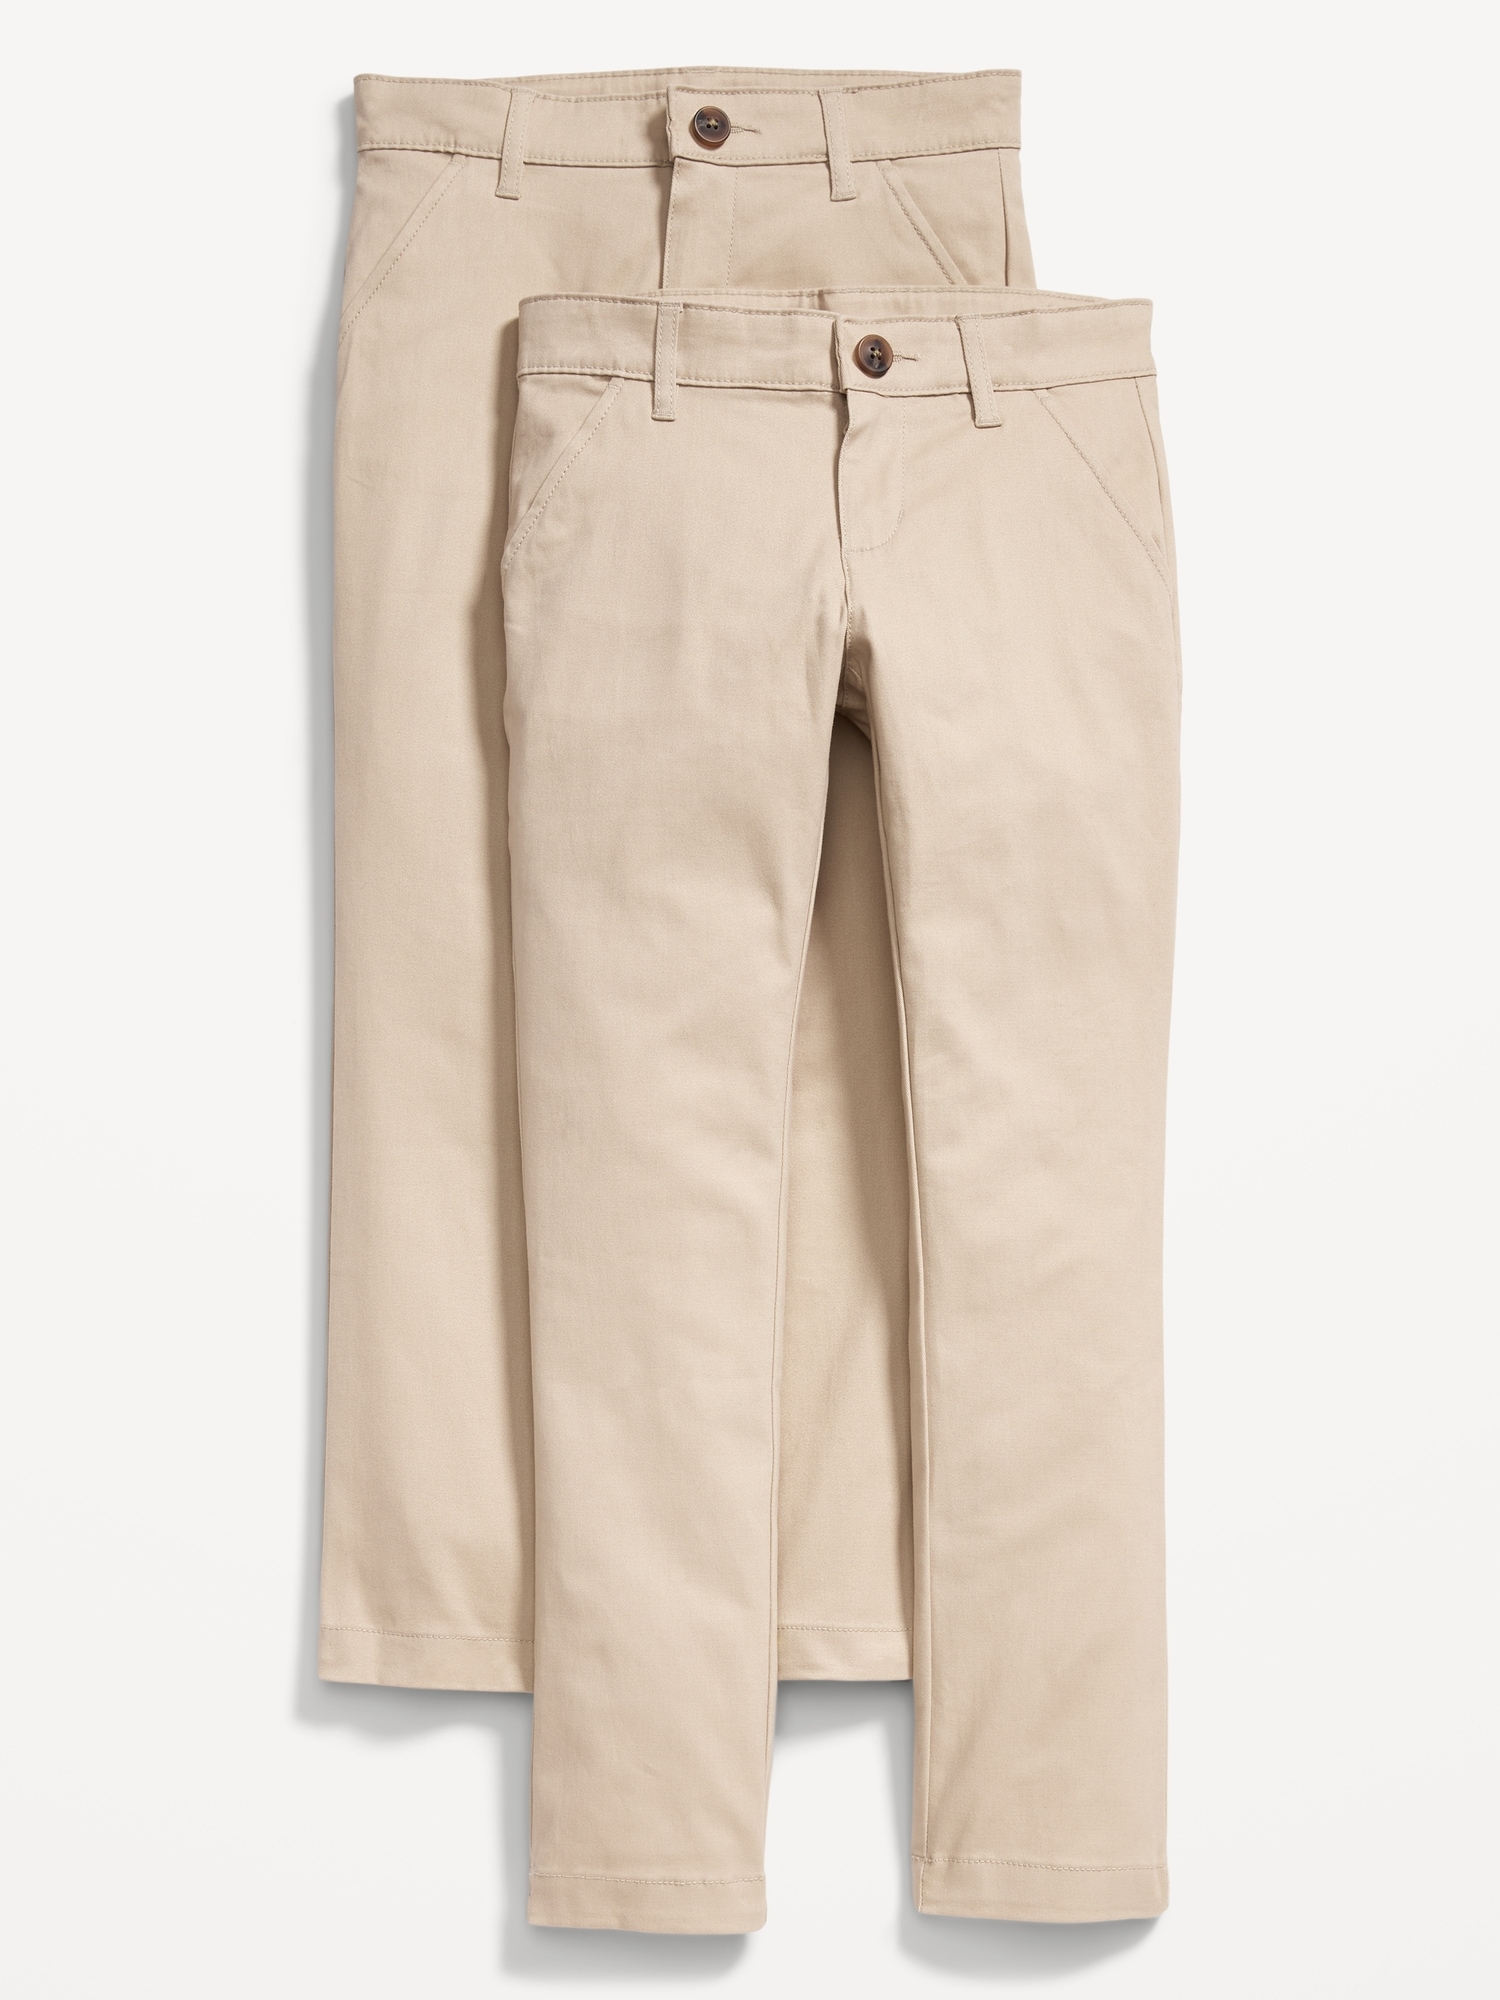 Appealing khaki pants for school uniforms For Comfort And Identity